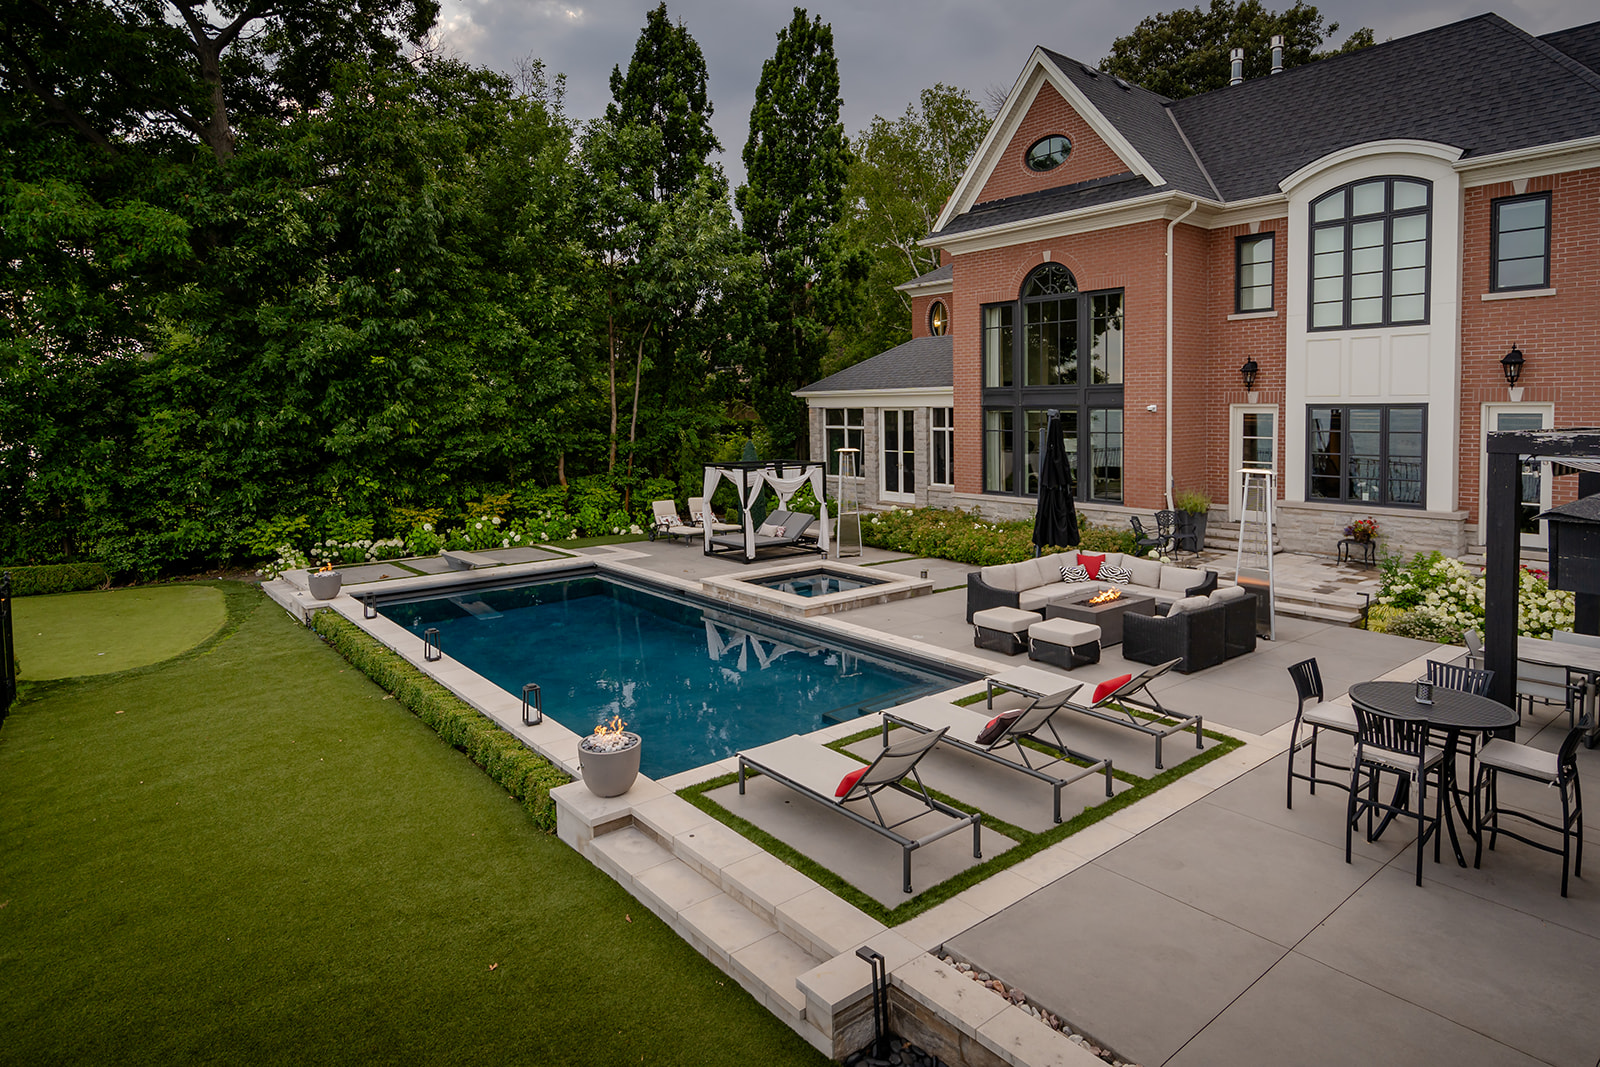 A backyard with an inground pool and a house in the background.